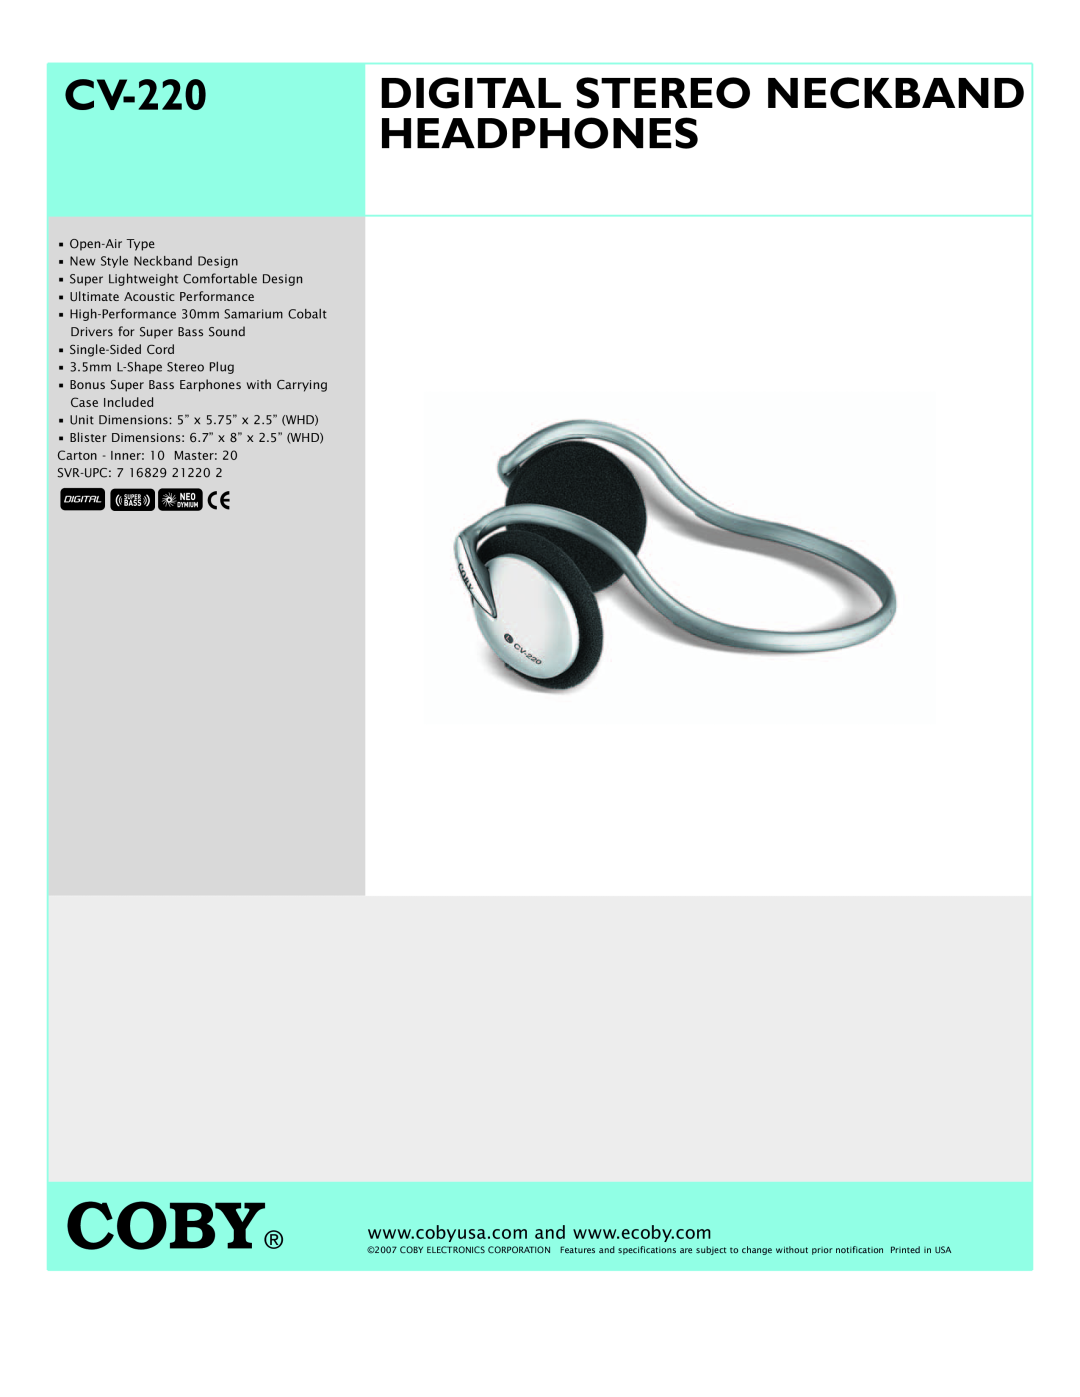 COBY electronic CV 220 specifications Coby, CV-220, Digital Stereo Neckband, Headphones 